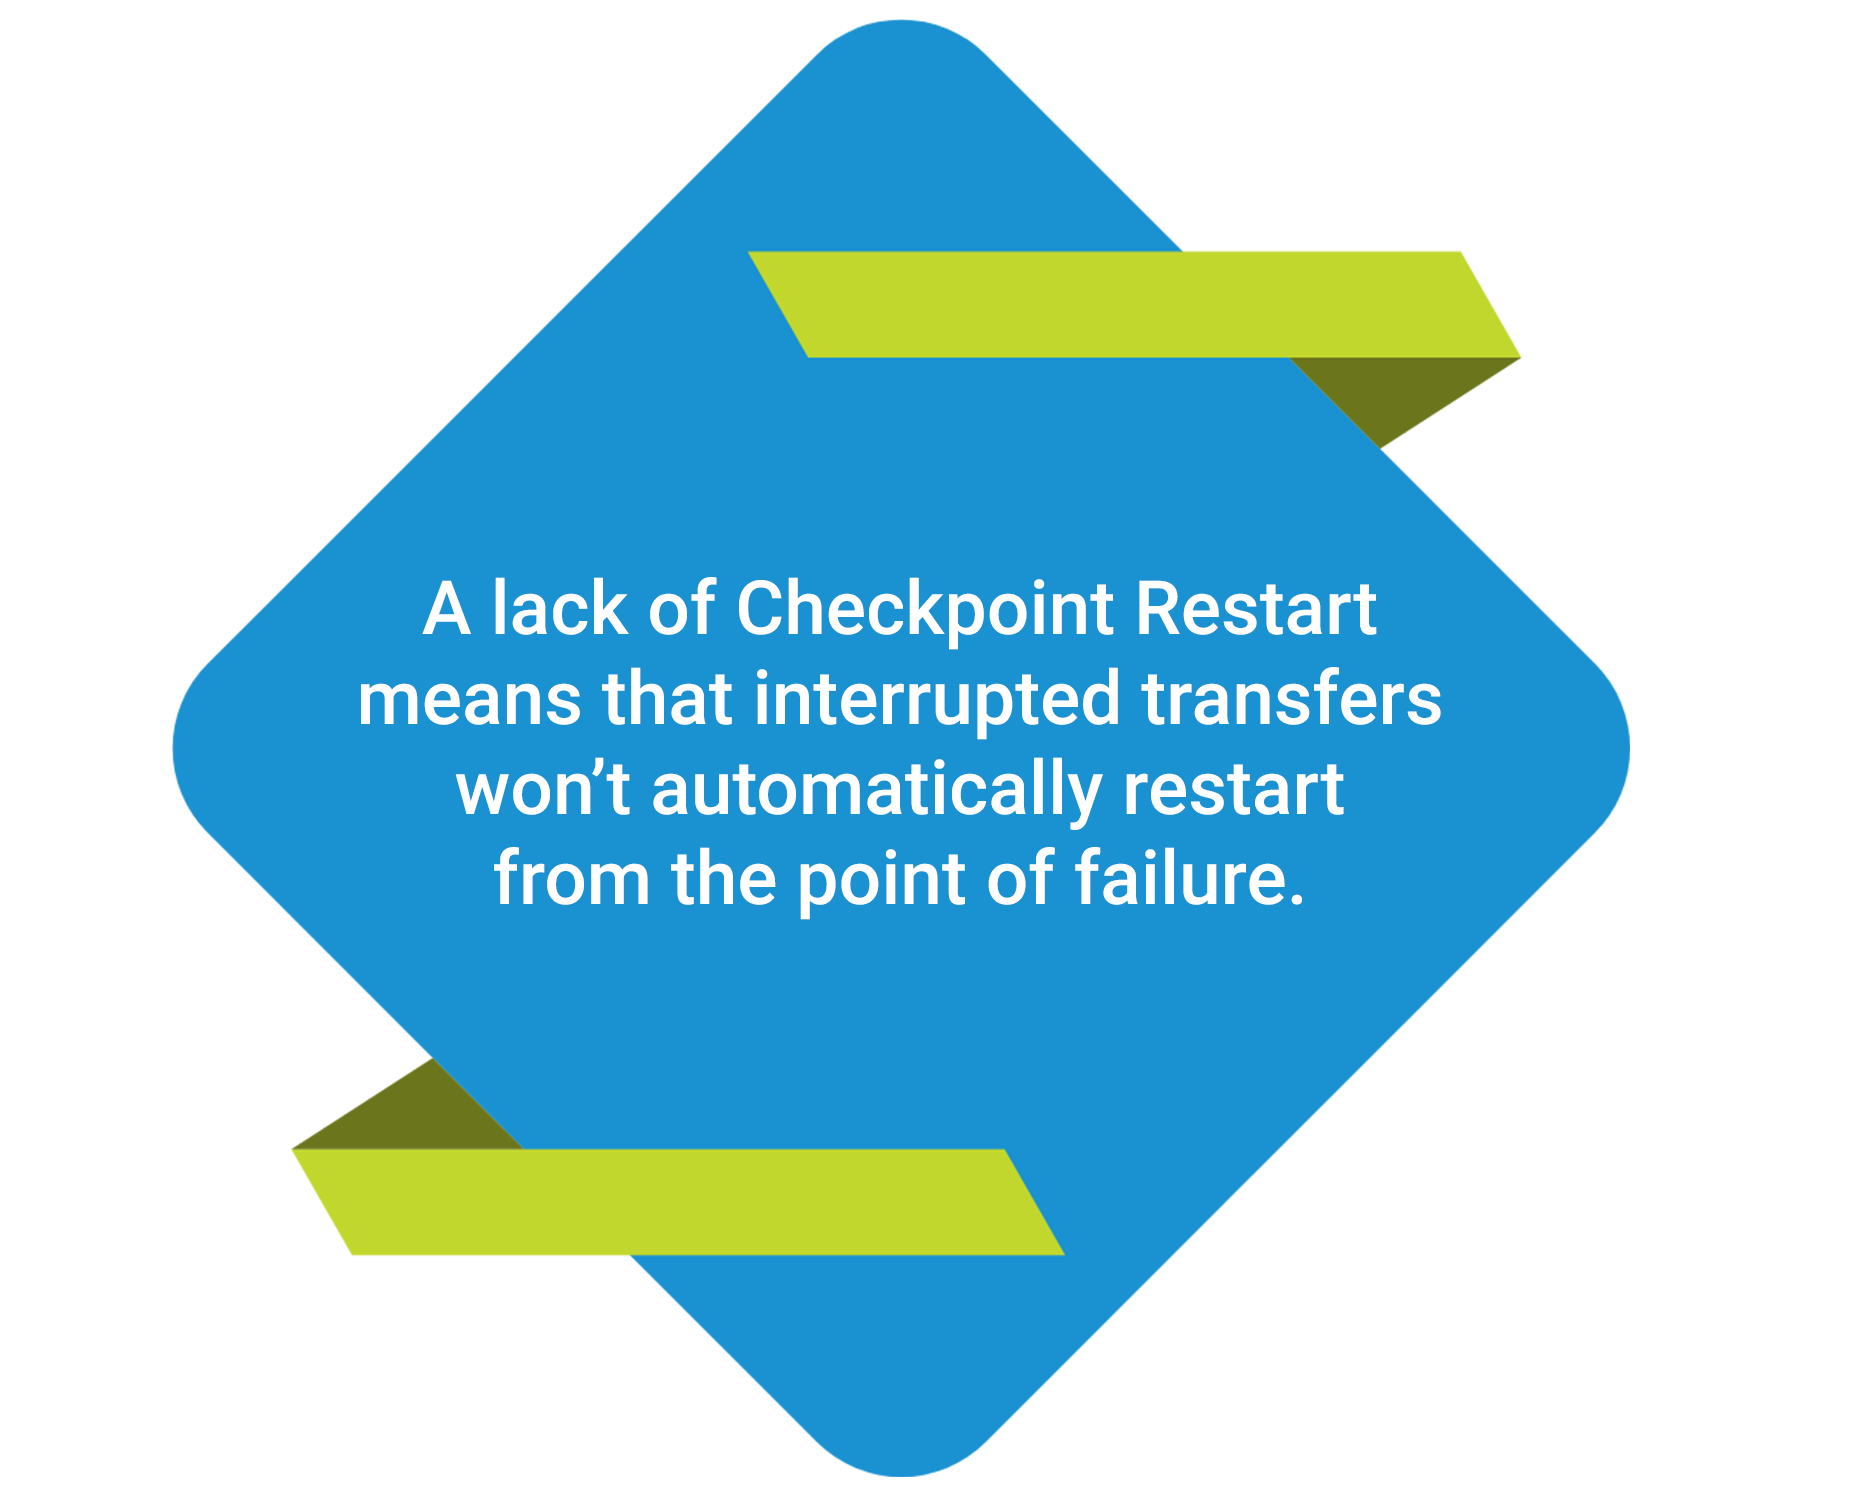 A lack of Checkpoint Restart means that interrupted transfers won't automatically restart from the point of failure.